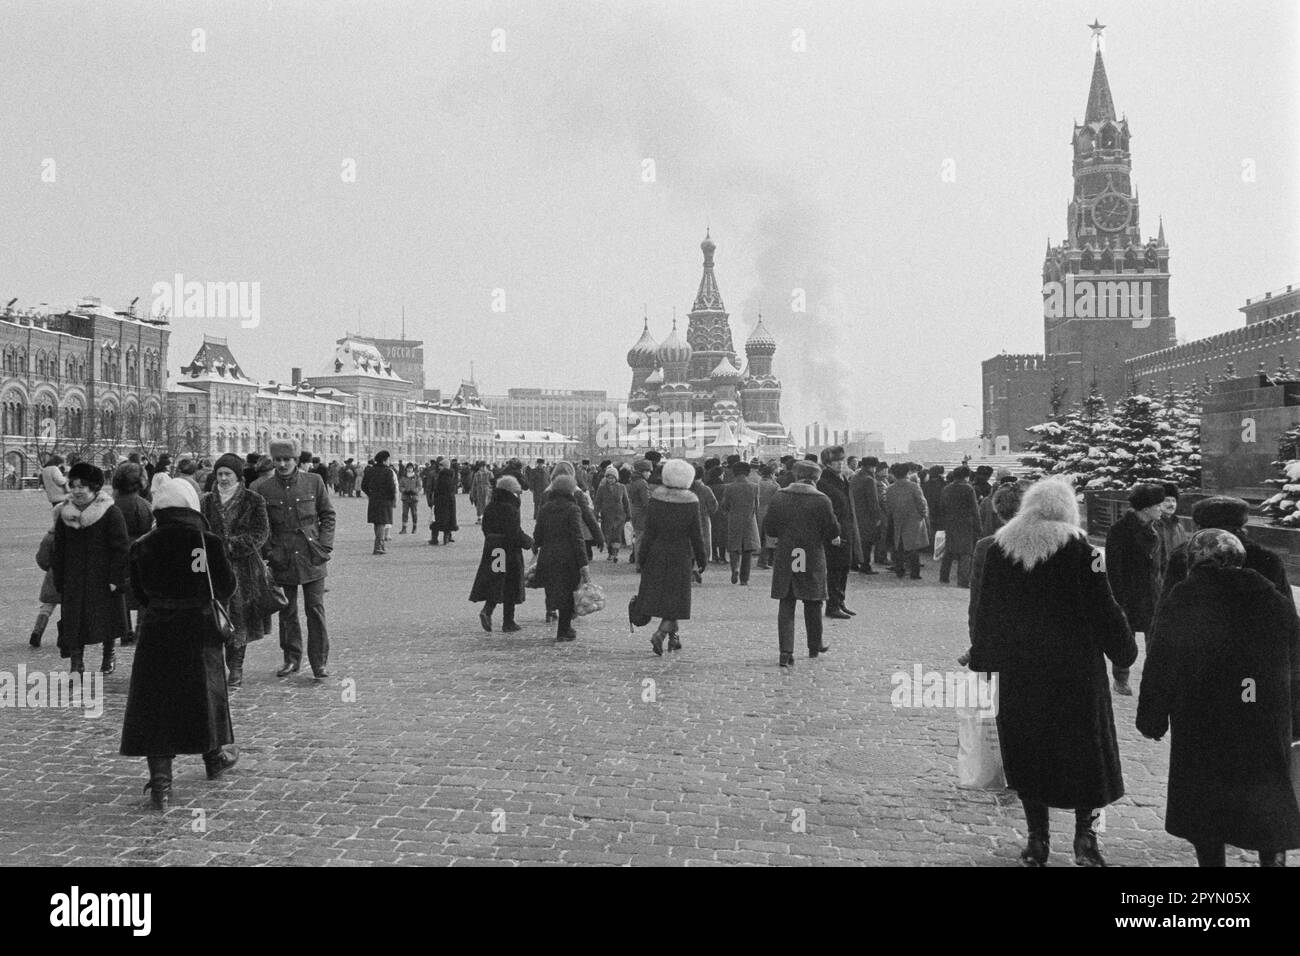 1985: People in Moscow's Red Square visiting Lenin’s mausoleum in front of St. Basil's Cathedral, the Kremlin and Spassky Tower. Stock Photo